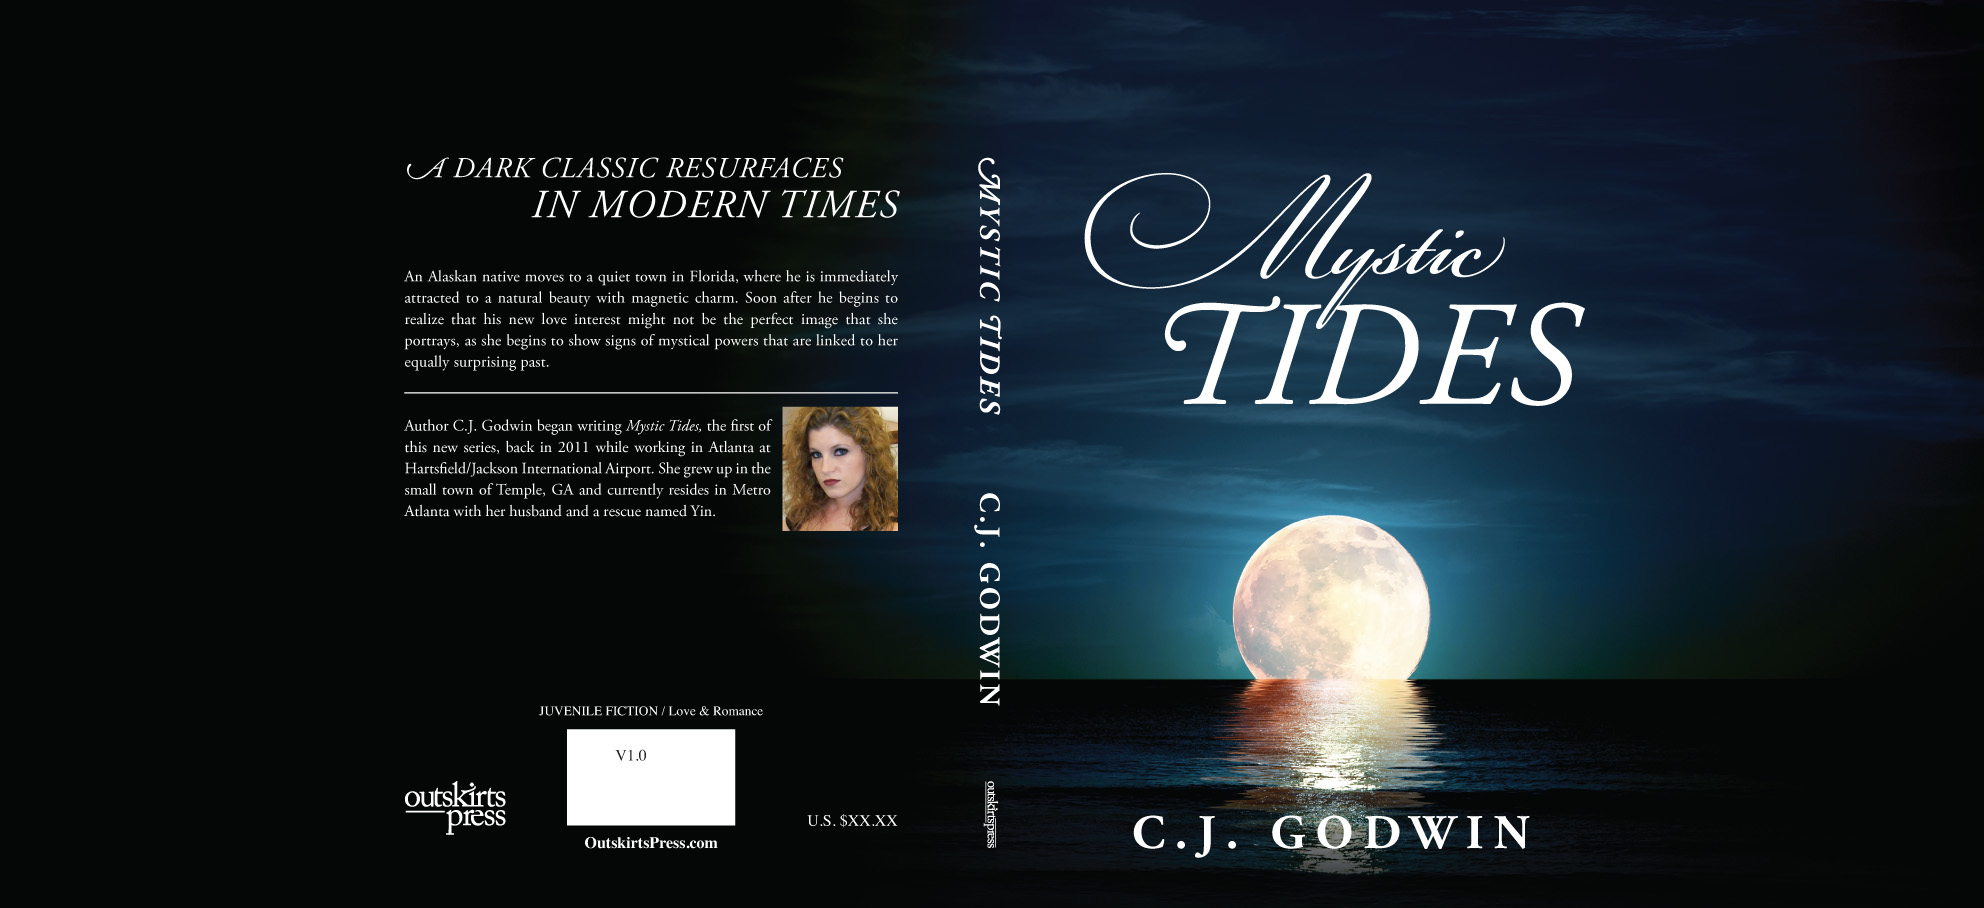 Mystic Tides YA fiction series inspired by Hans Christian Andersen's The Little Mermaid.